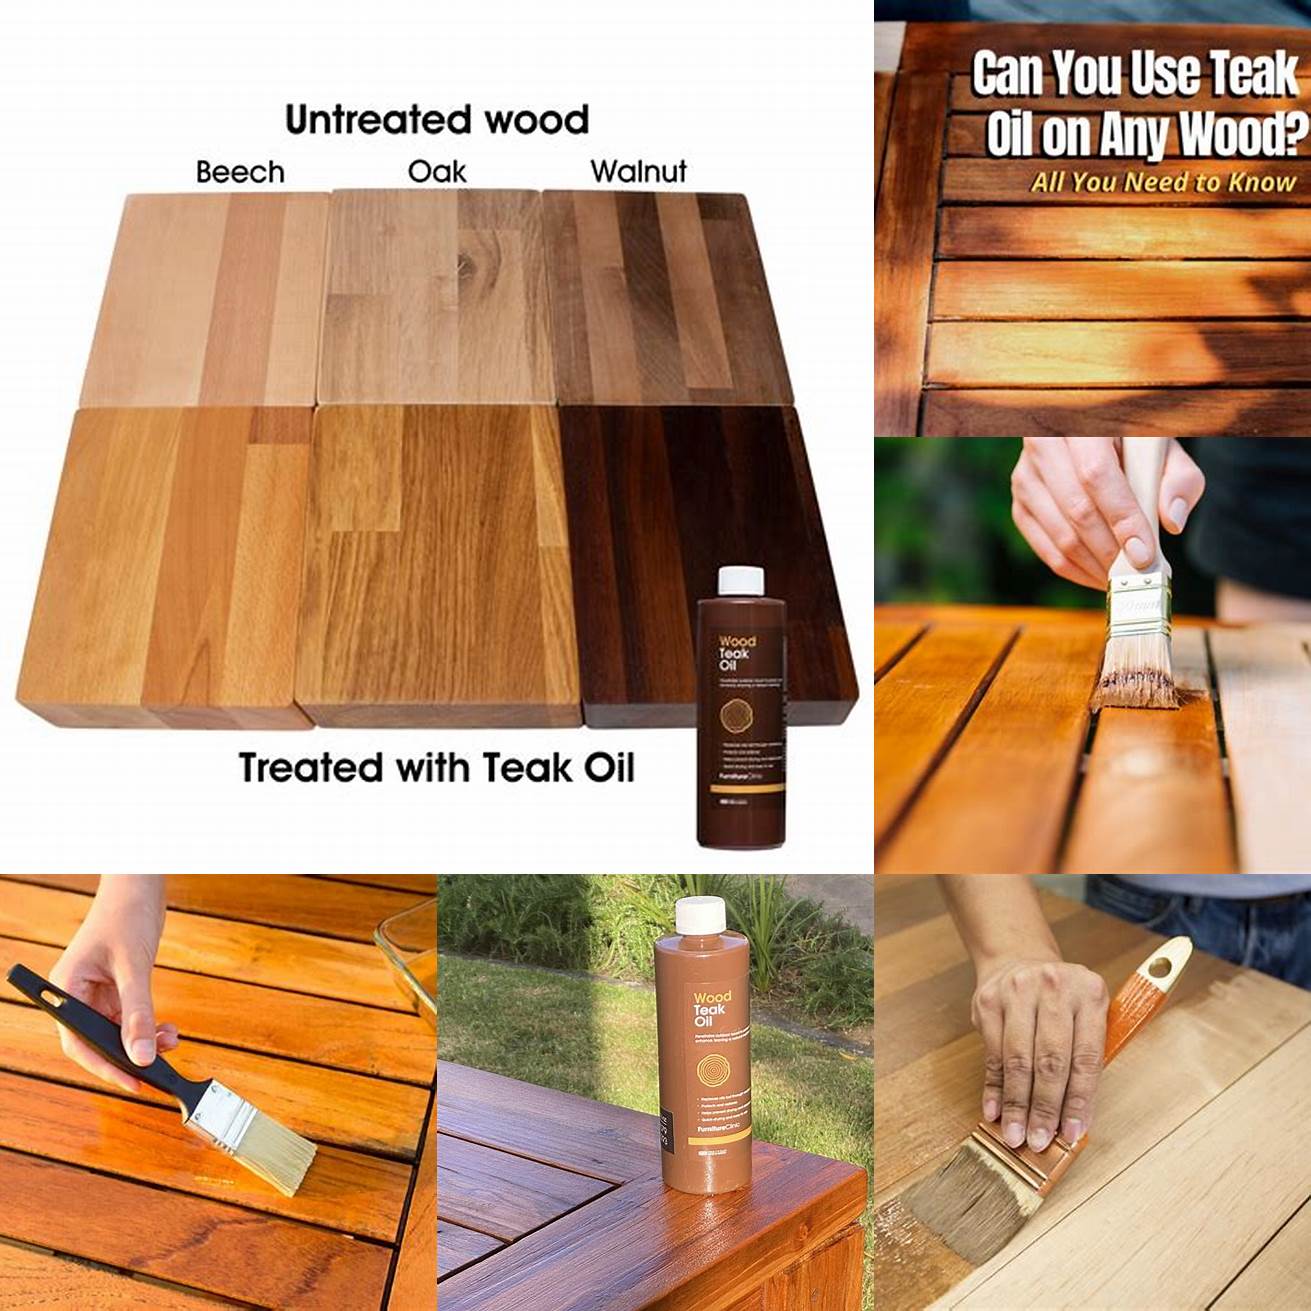 Use a teak oil to keep the wood looking rich and vibrant